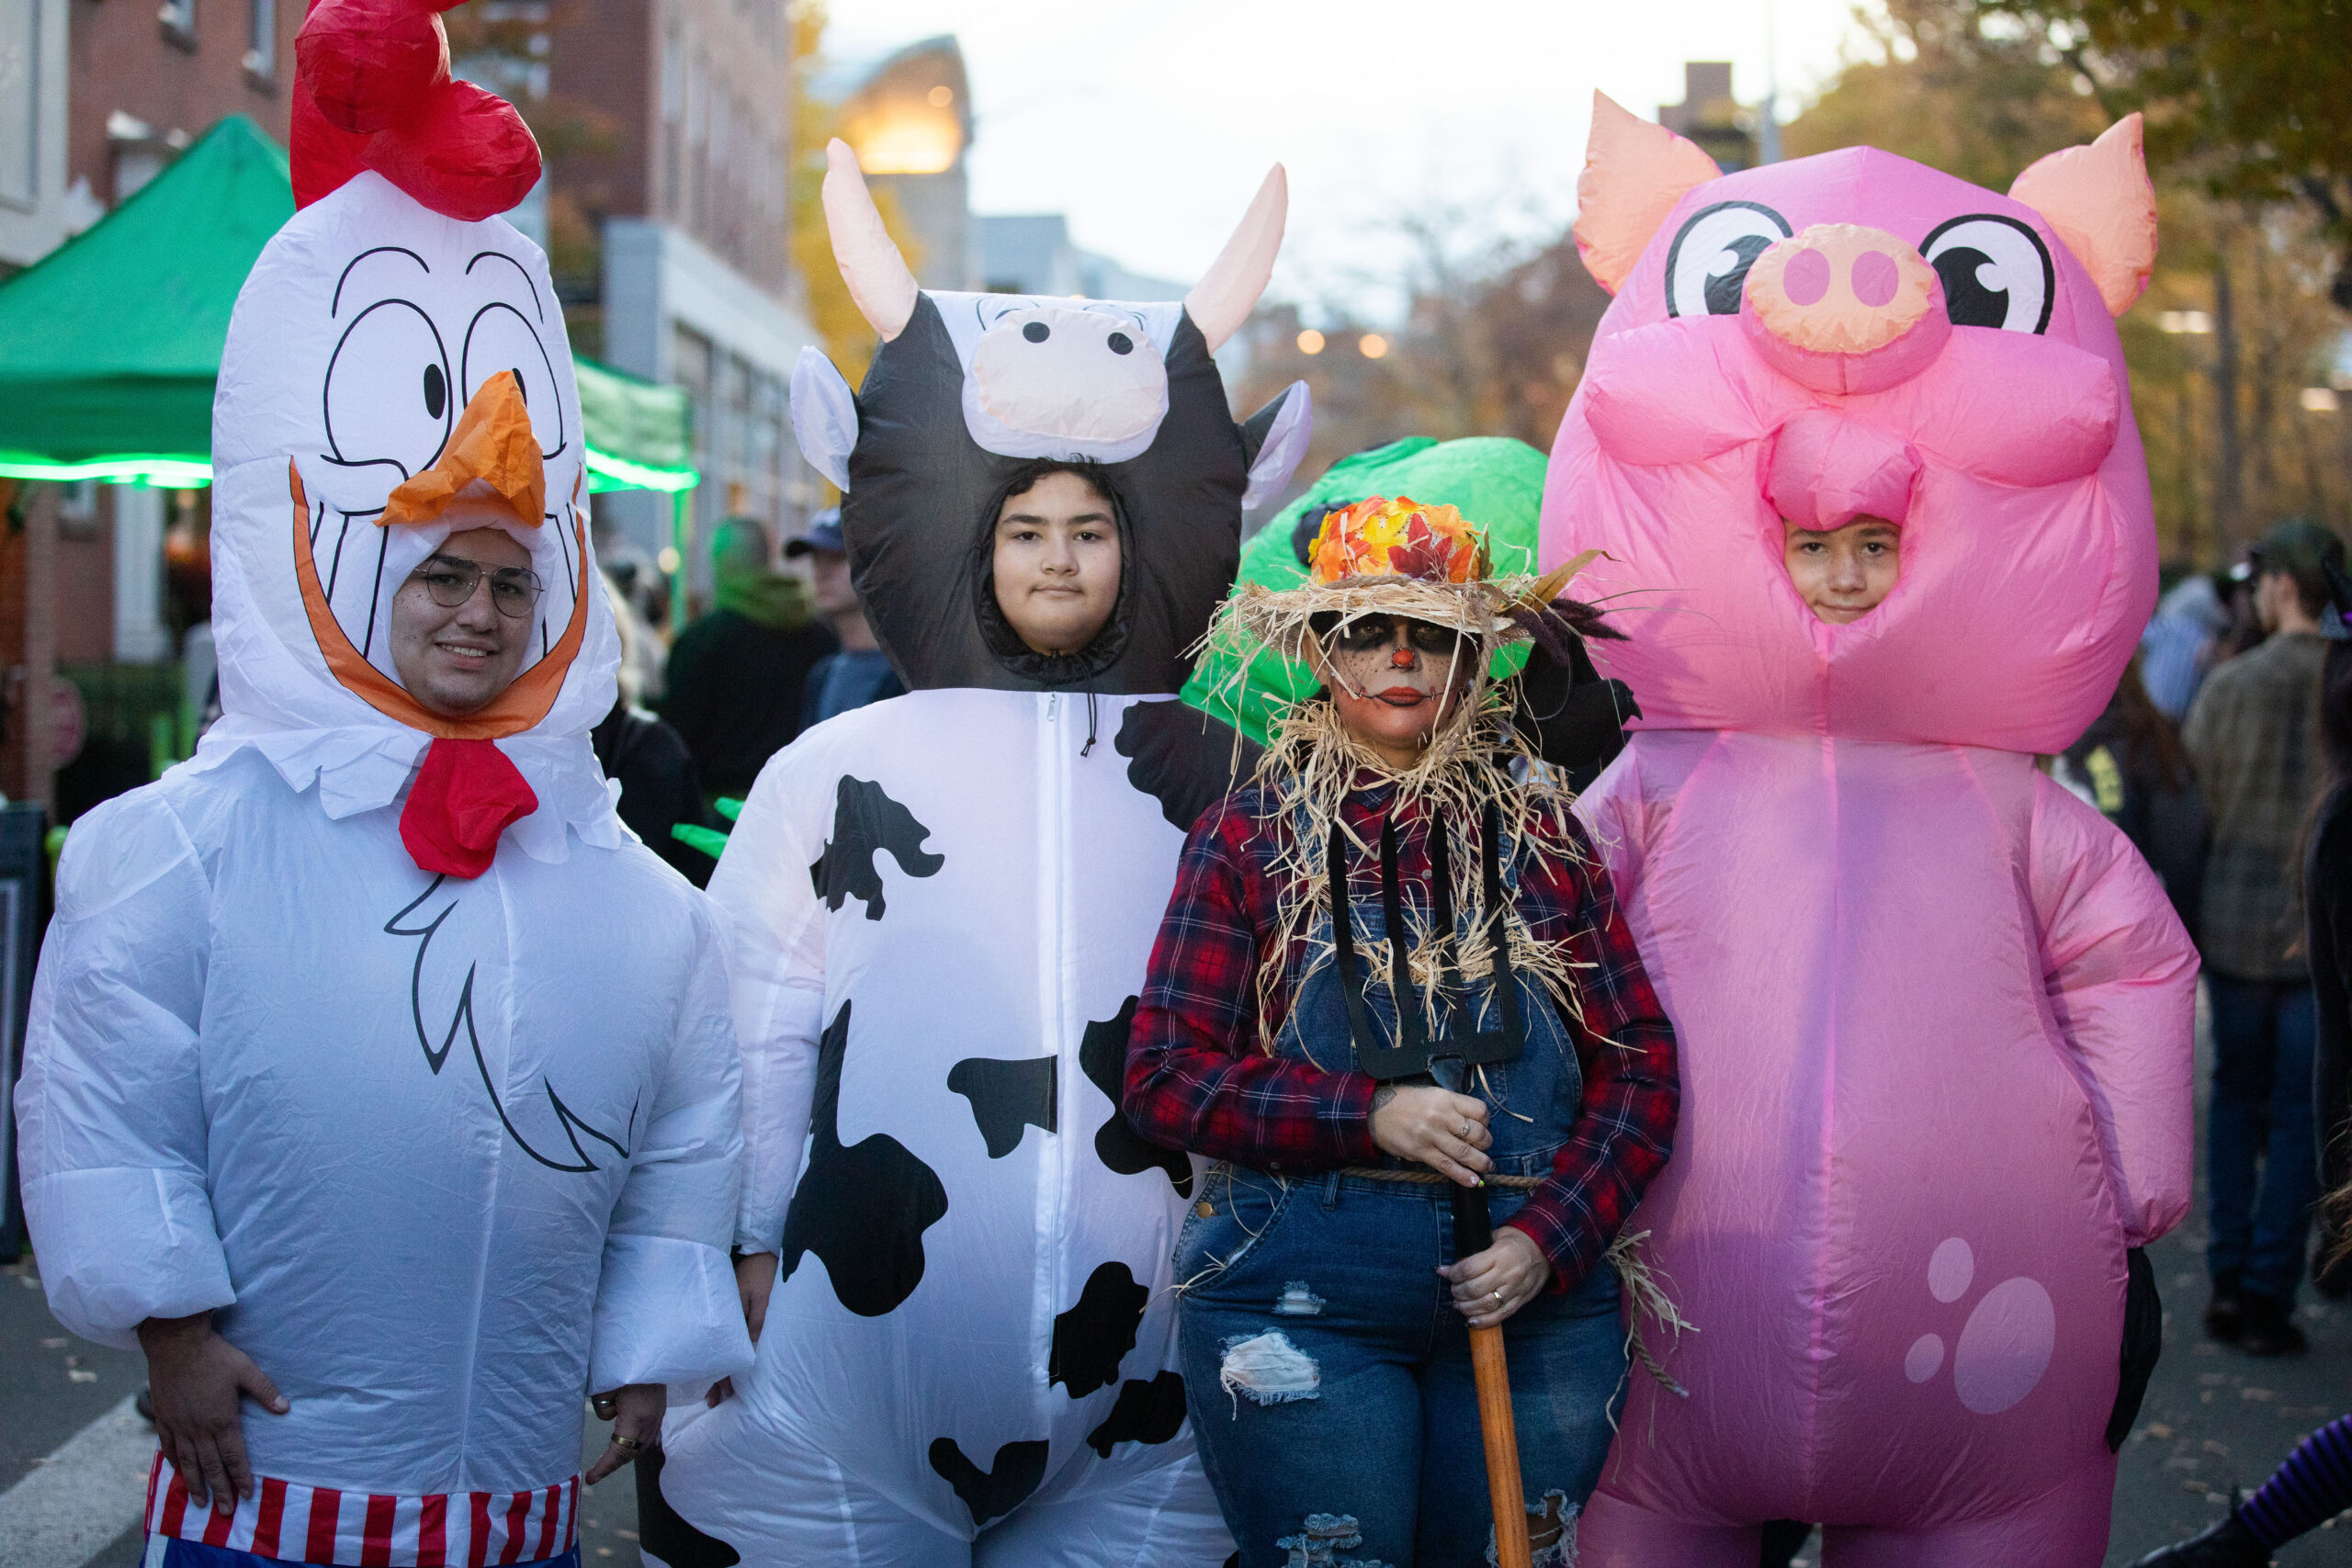 A group of people dressed as cows and pigs on a street.